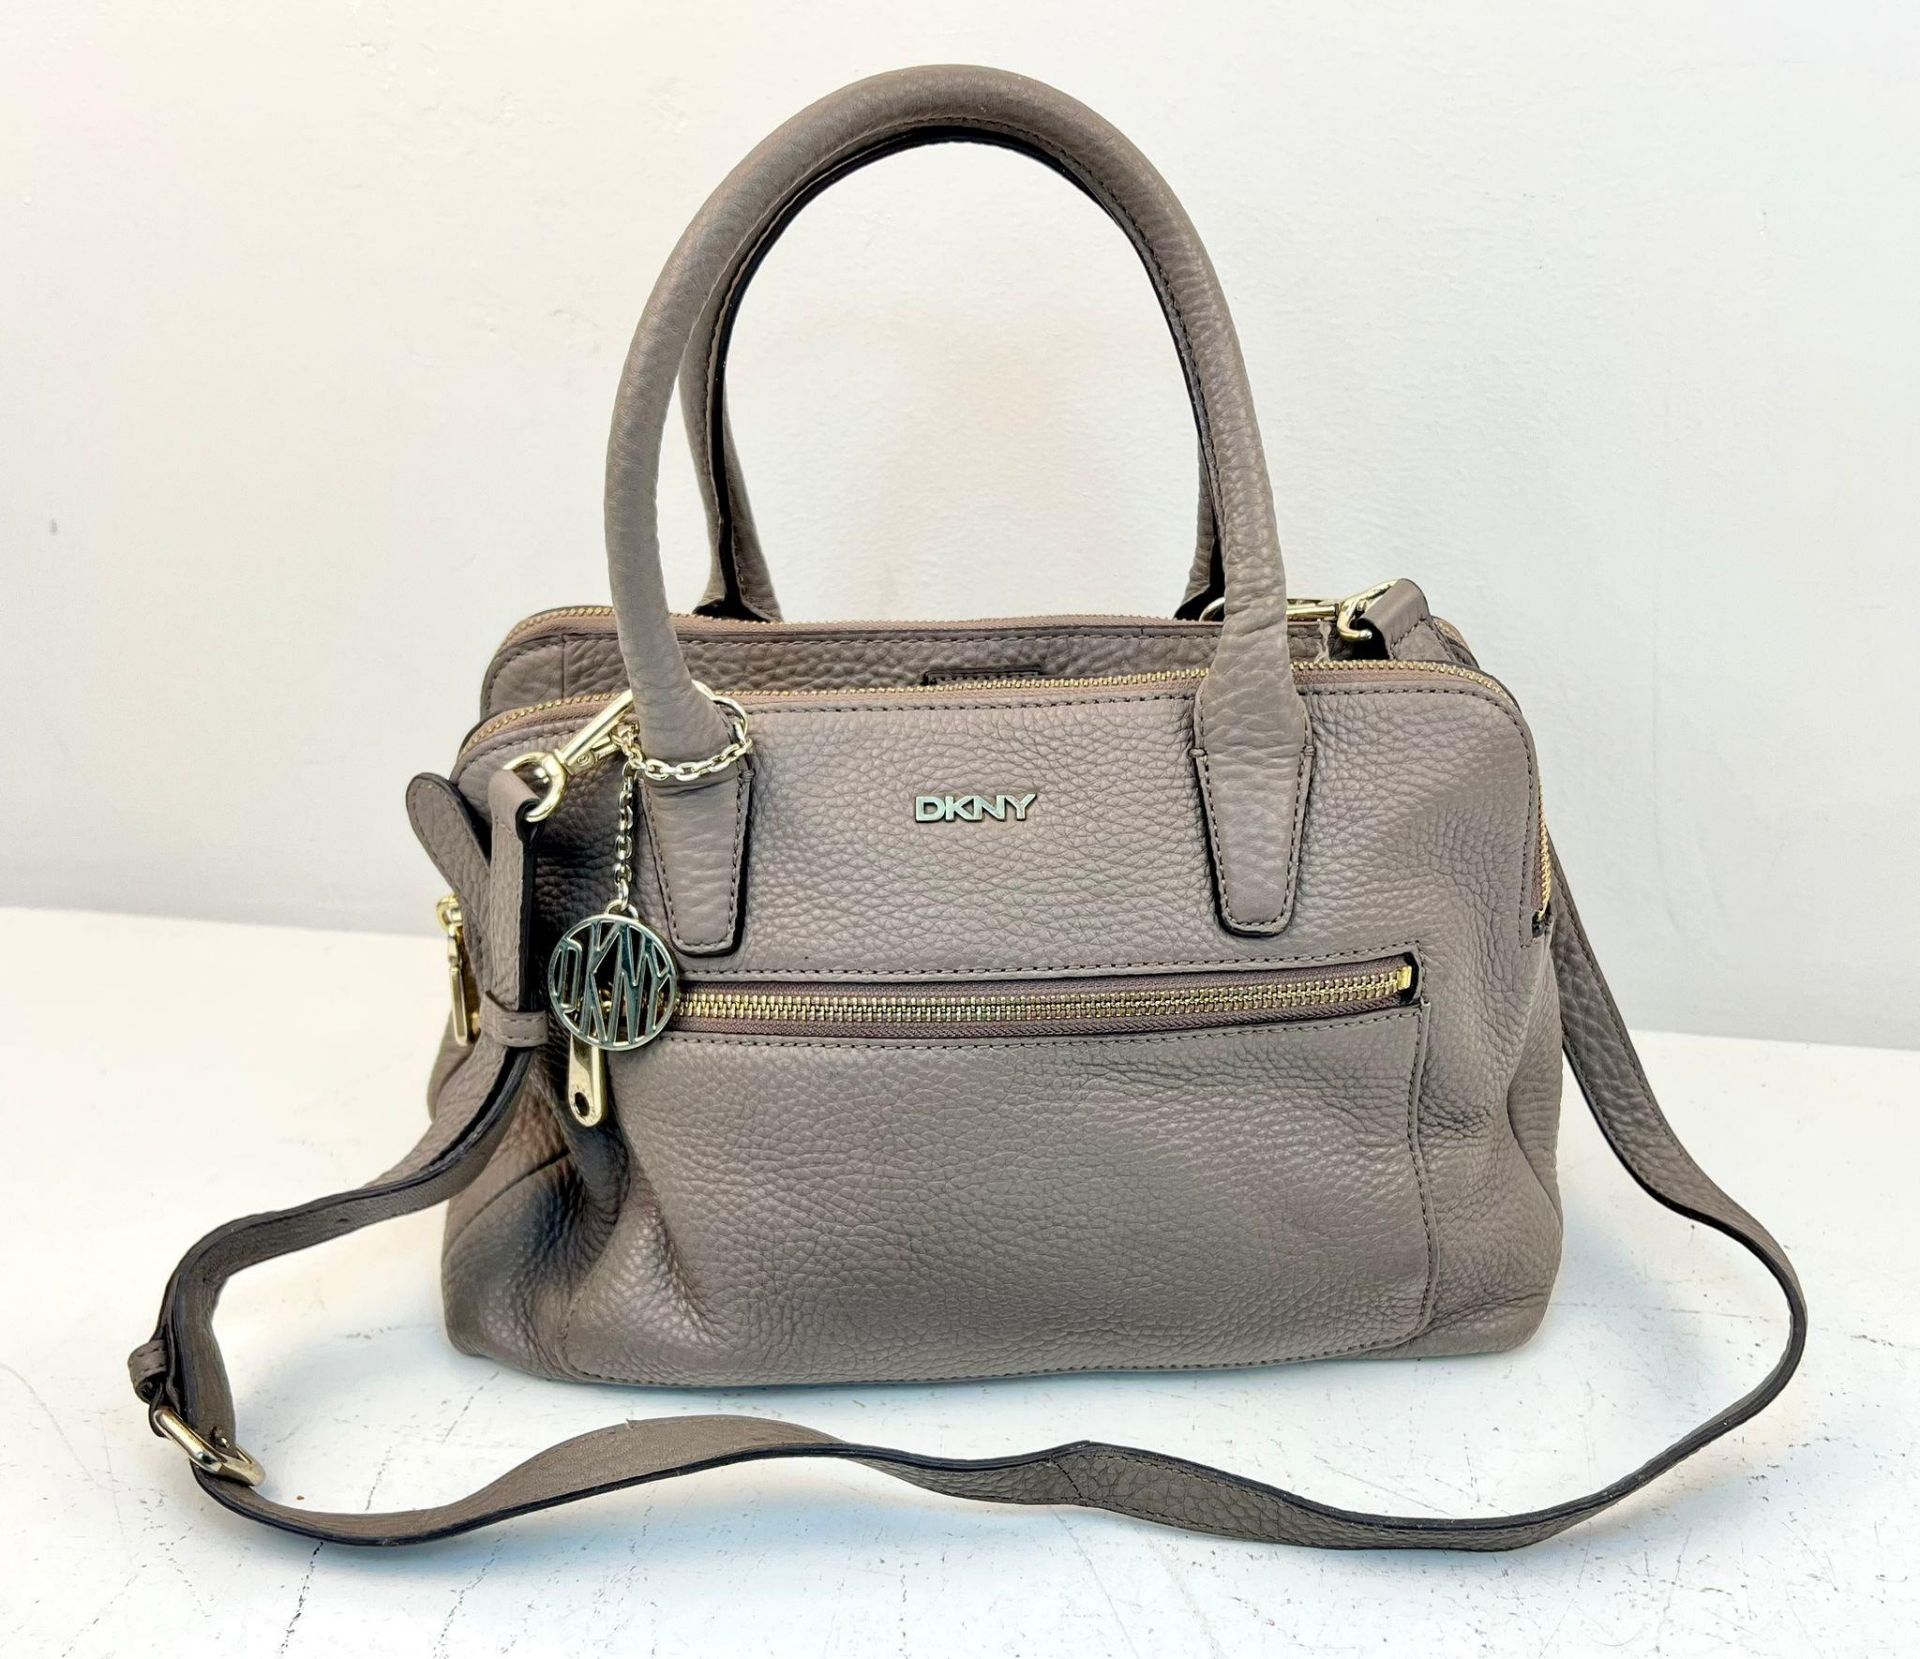 A DKNY Brown Leather Handbag with Shoulder Strap. Gold-tone hardware. Exterior zipped compartment.